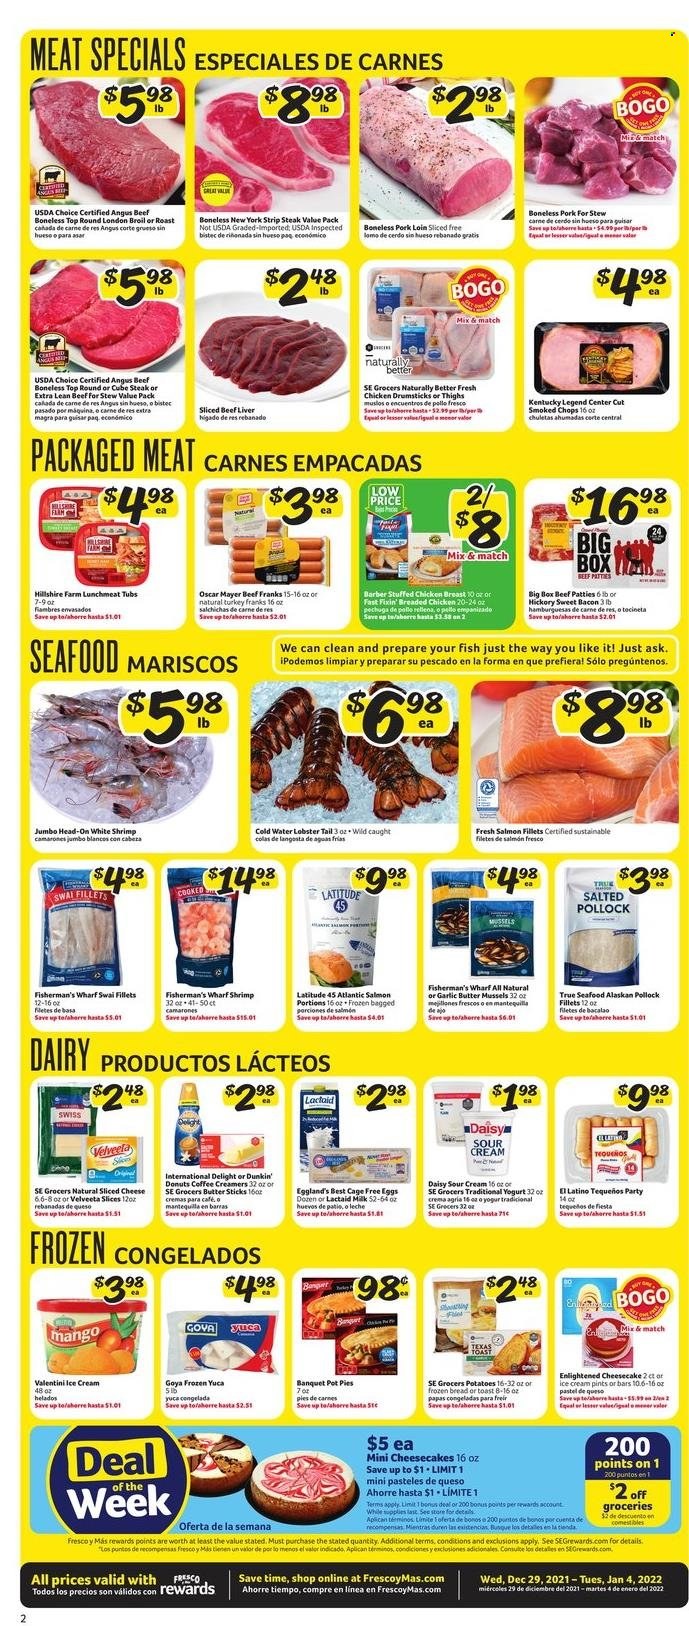 thumbnail - Fresco y Más Flyer - 12/29/2021 - 01/04/2022 - Sales products - Fast Fixin', bread, pot pie, potatoes, mango, lobster, mussels, salmon, salmon fillet, pollock, seafood, fish, lobster tail, shrimps, swai fillet, fried chicken, stuffed chicken, bacon, Hillshire Farm, Oscar Mayer, lunch meat, Lactaid, sliced cheese, cheese, yoghurt, milk, eggs, cage free eggs, butter, sour cream, ice cream, Enlightened lce Cream, Goya, coffee, chicken drumsticks, beef liver, beef meat, steak, striploin steak, pork loin, pork meat. Page 2.